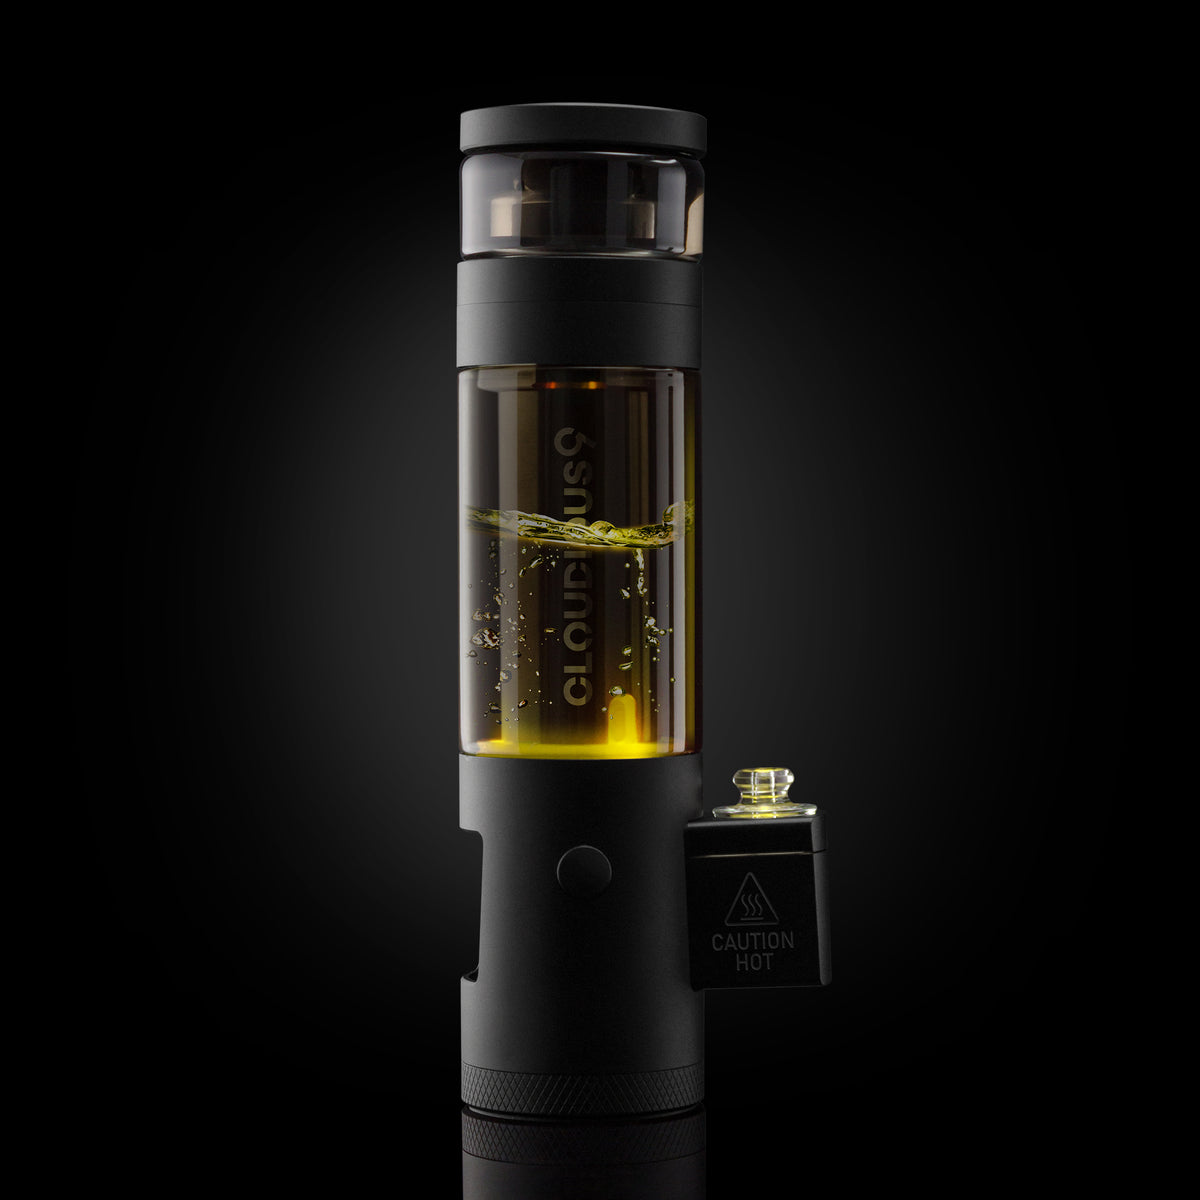 Hydrology9 NX Flower & Concentrate Vaporizer - Cloudious9